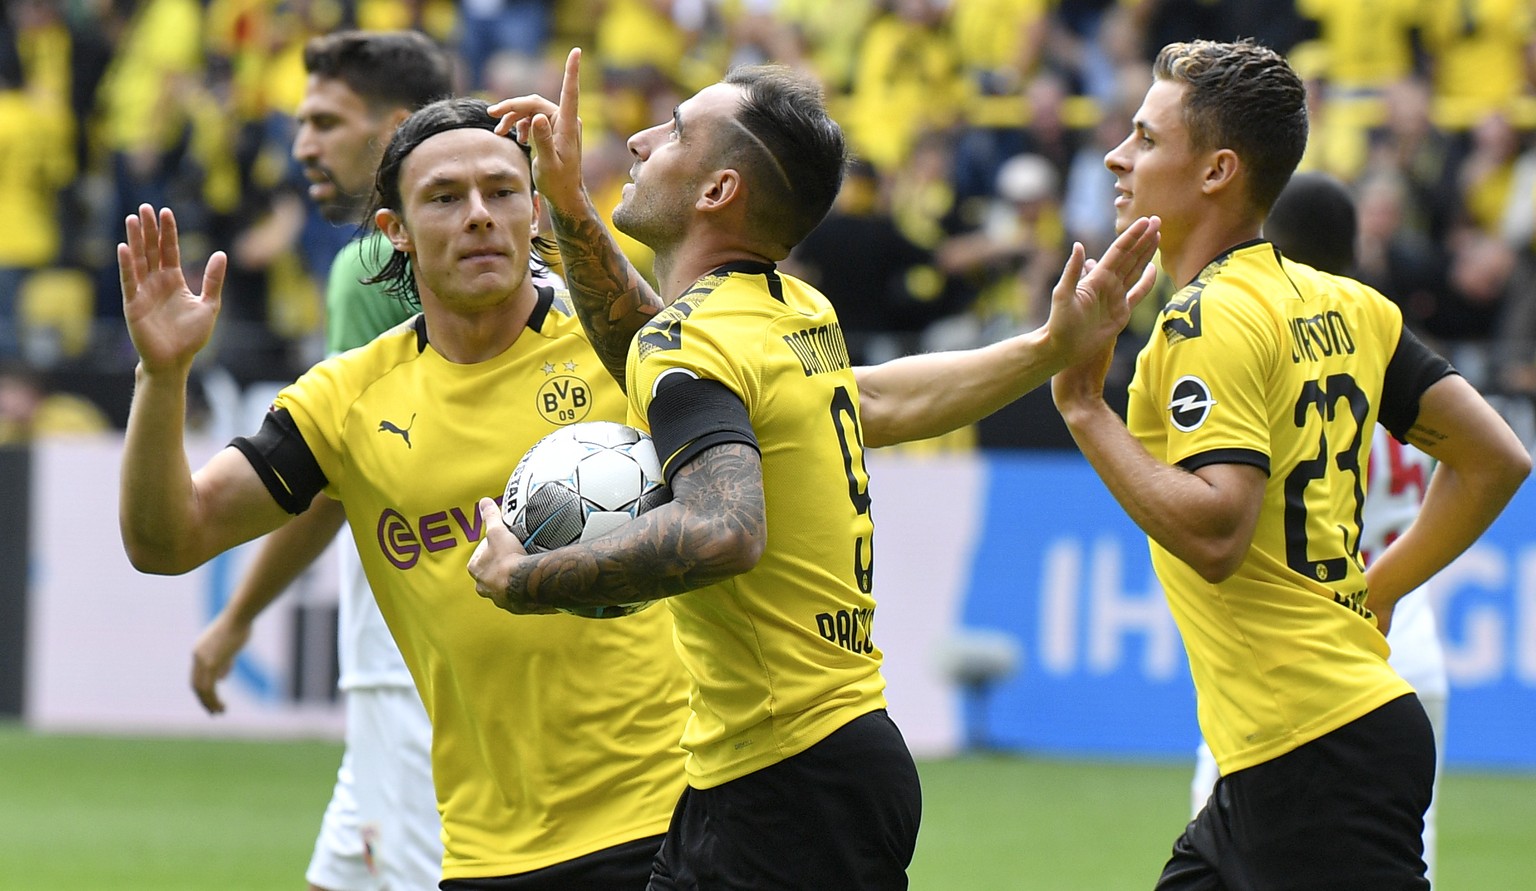 Dortmund&#039;s Paco Alcacer, center, celebrates after scoring his side&#039;s first goal during the German Bundesliga soccer match between Borussia Dortmund and FC Augsburg at the Signal Iduna Park s ...